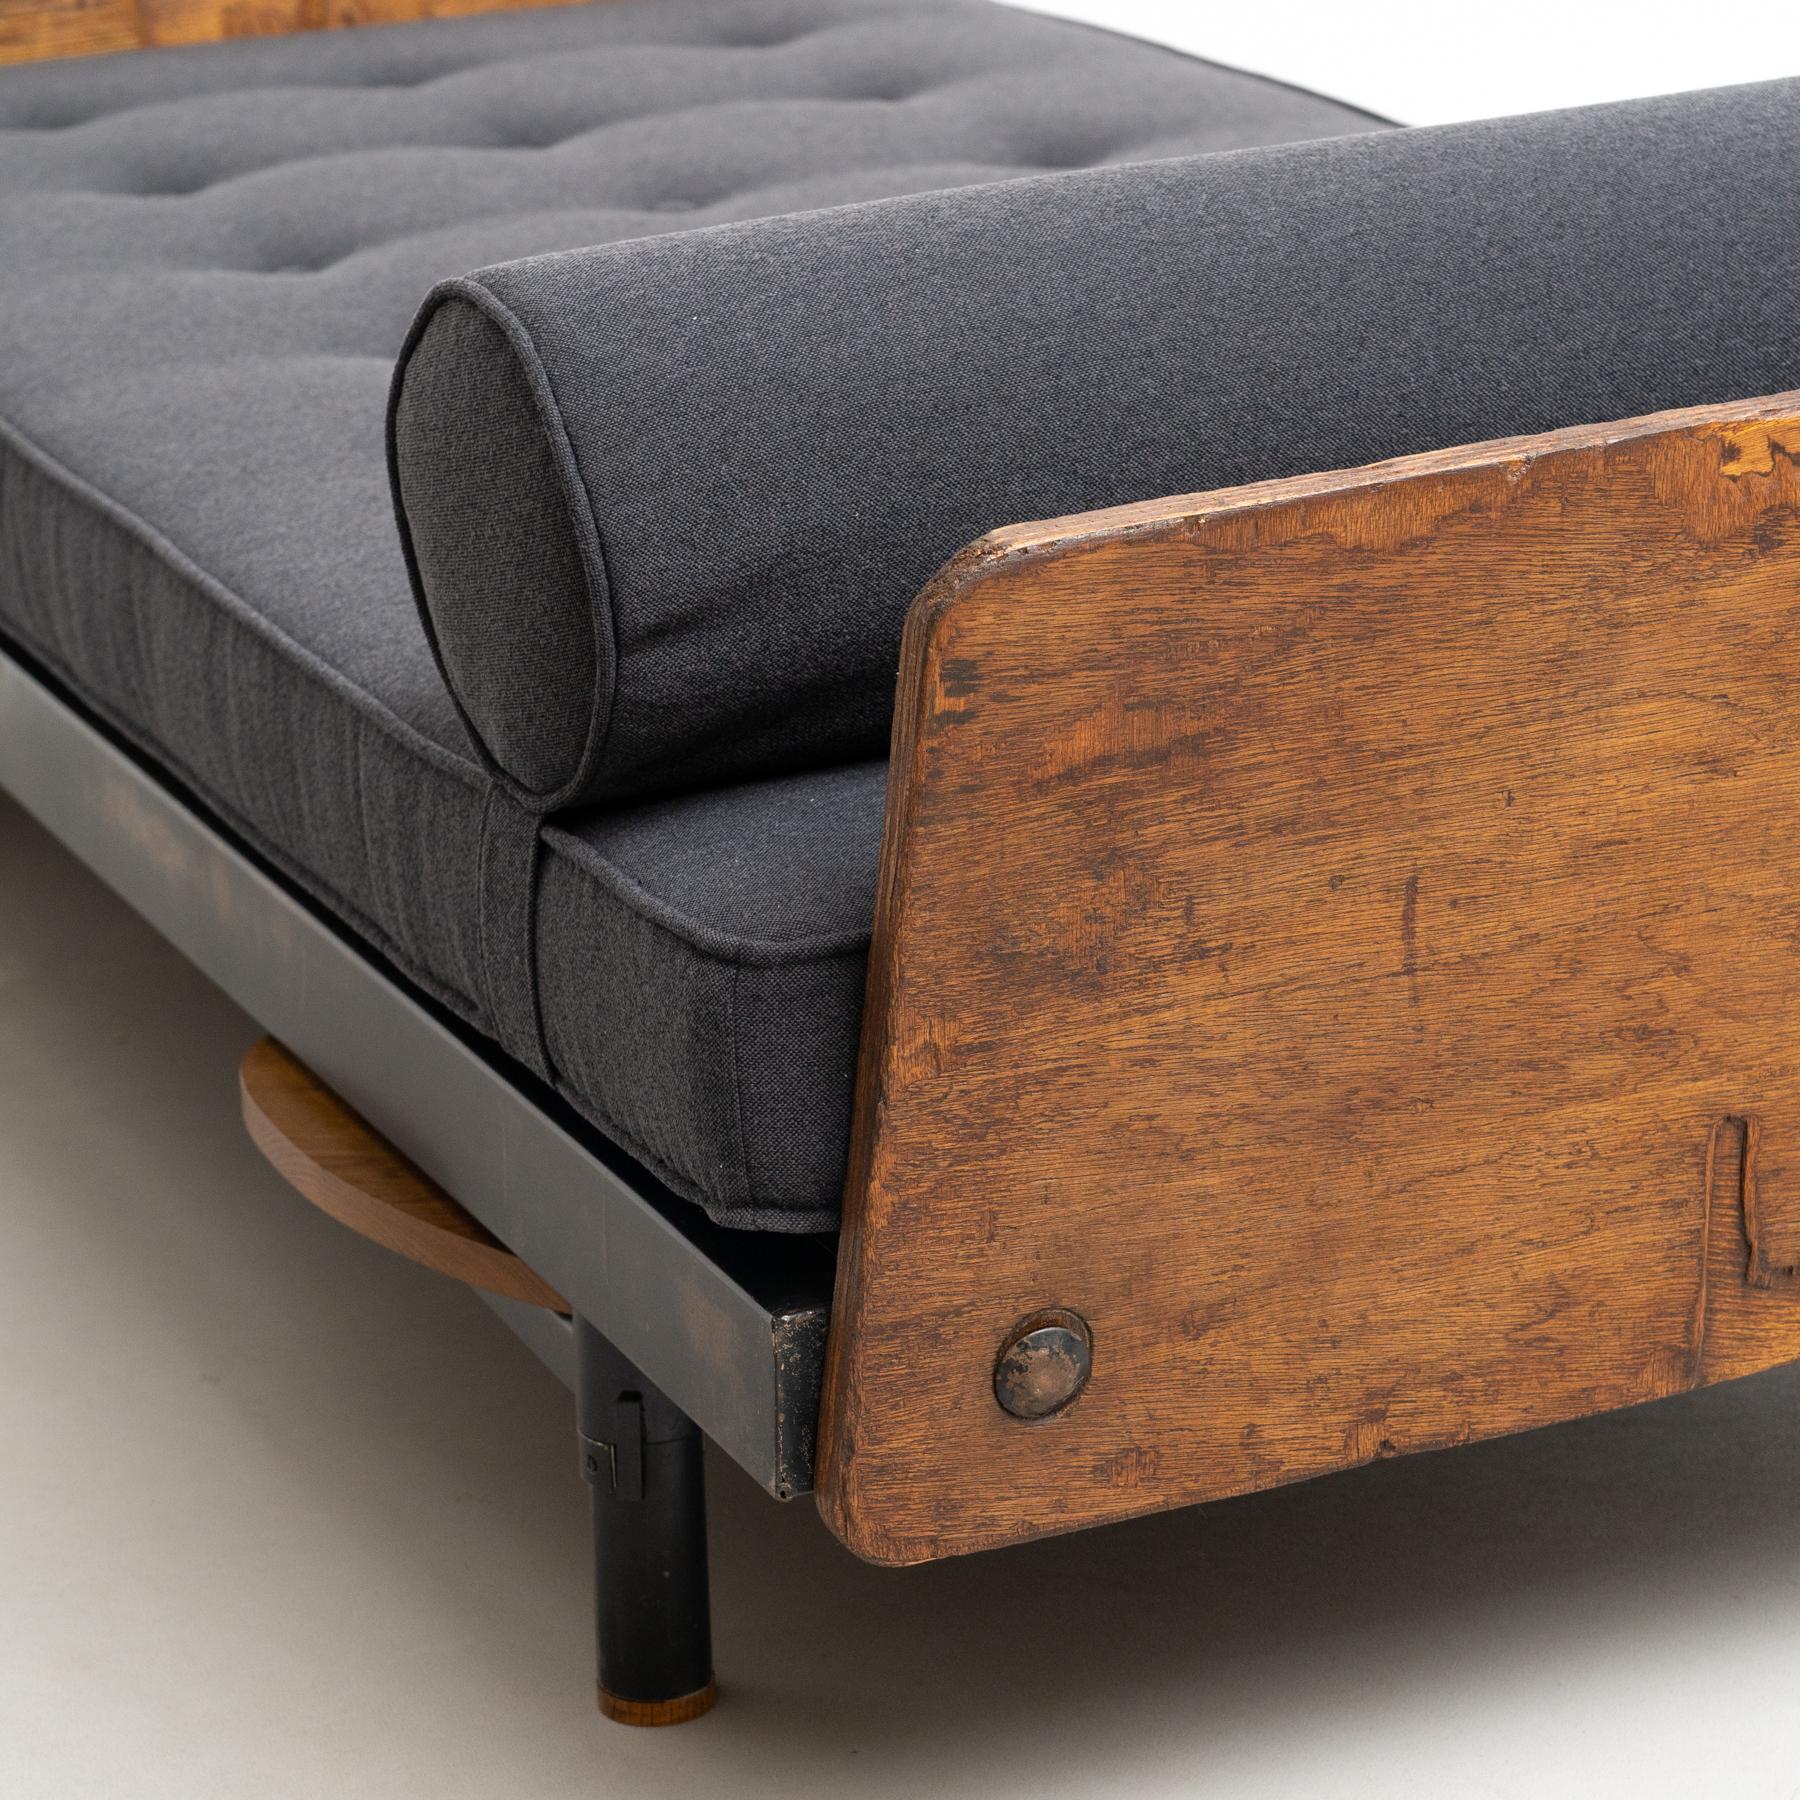 Jean Prouve Mid-Century Modern S.C.A.L. Daybed, circa 1950 12